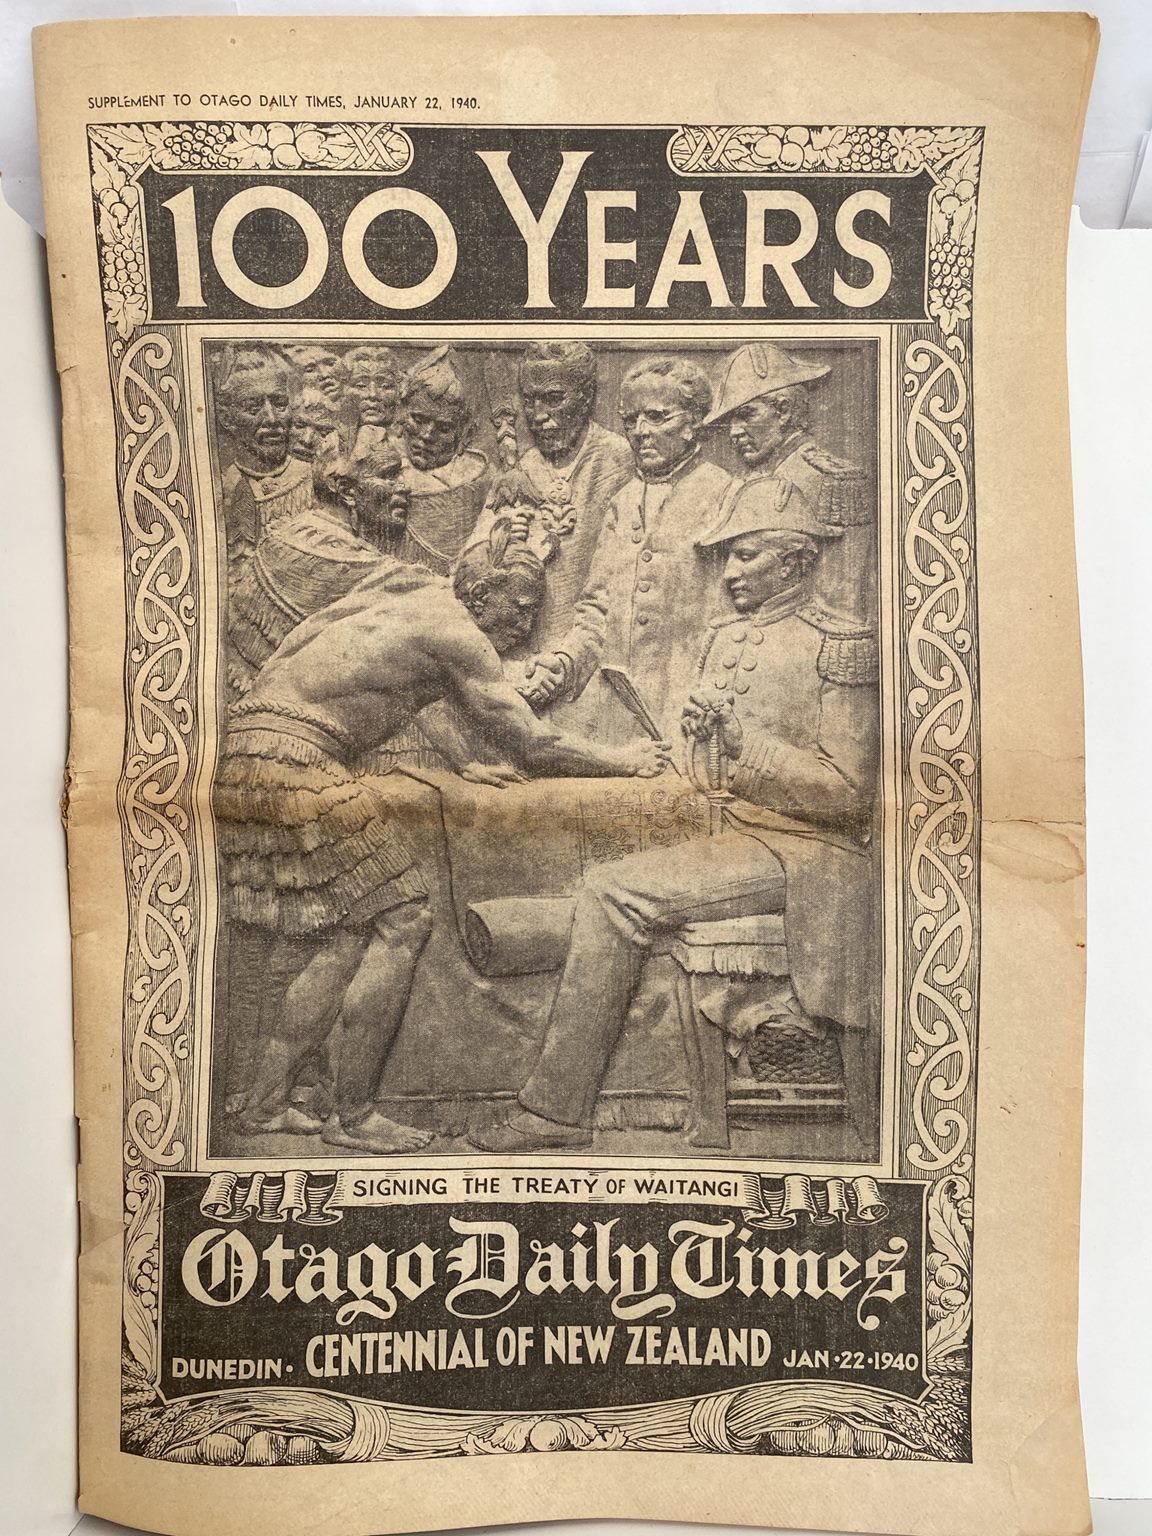 Old Newspaper The Otago Daily Times 1840 1940 Centennial Of New Zealand 2959